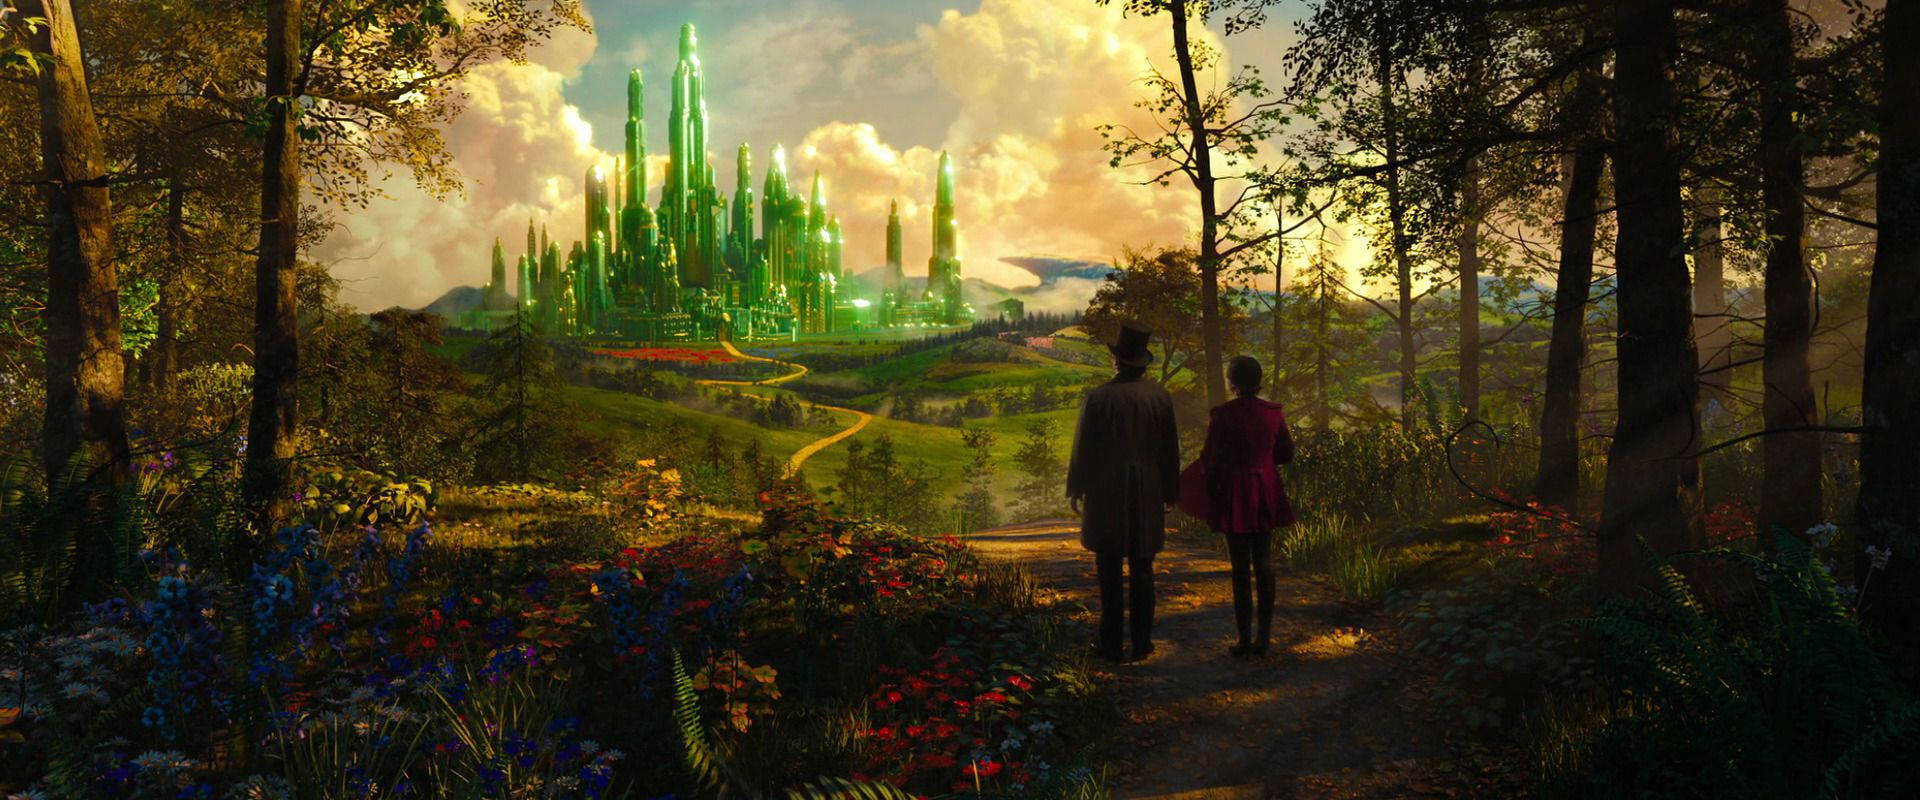 Oz The Great And Powerful 2013 Film Wallpaper